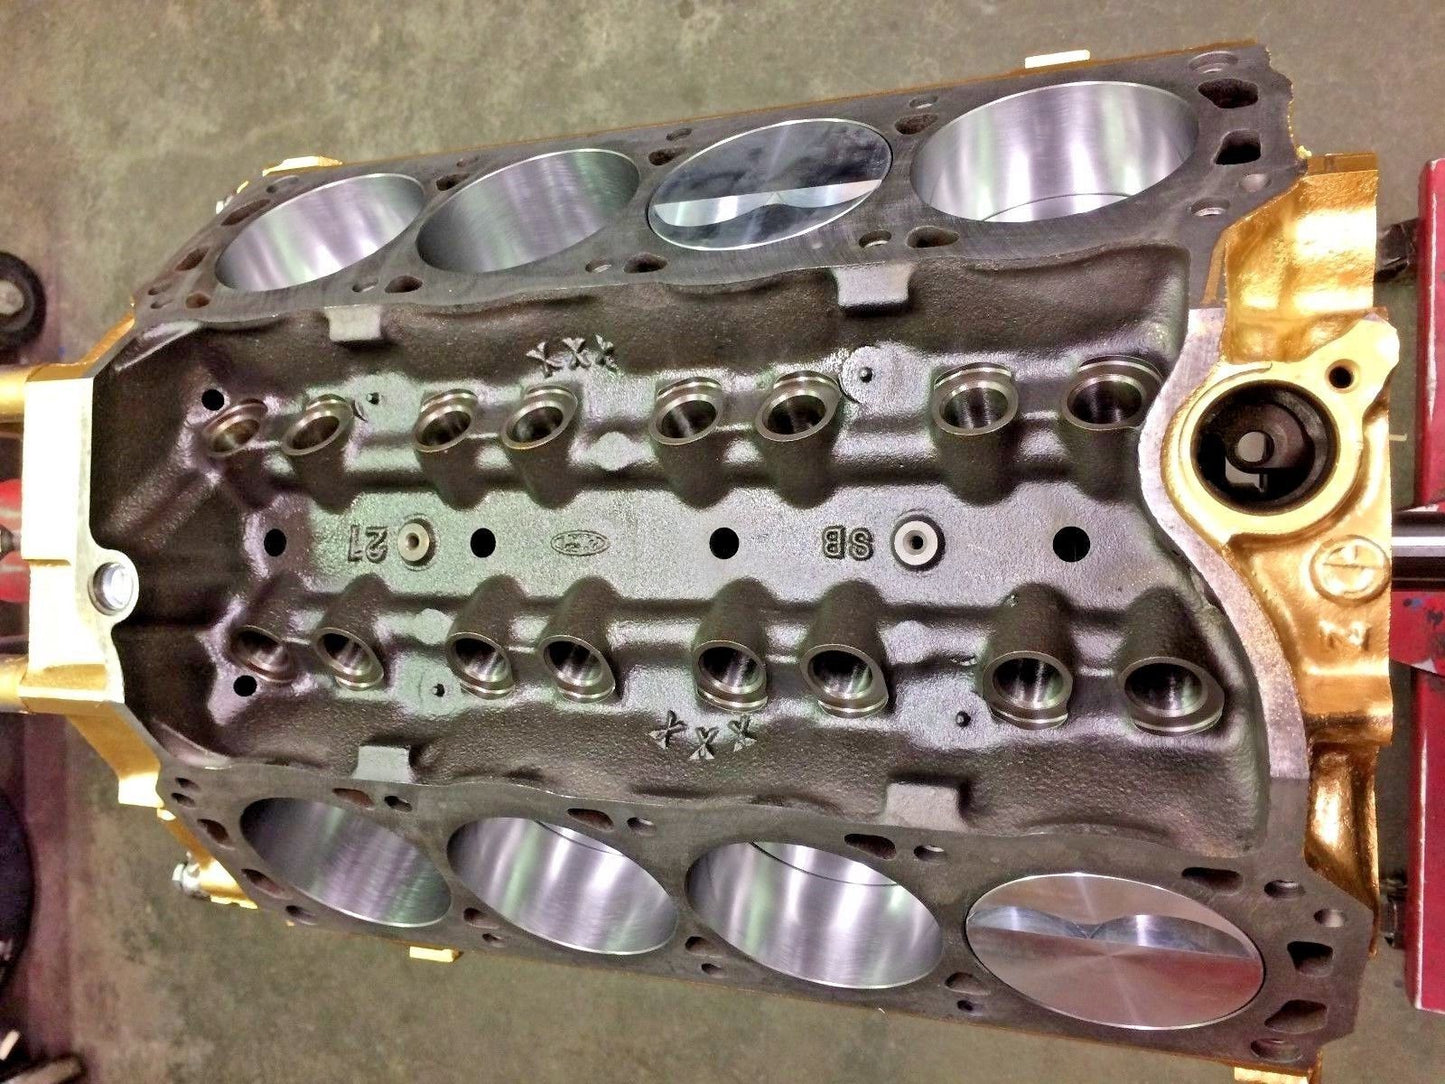 347ci Ford Short block,race prep,makes 500+hp, Forged pistons, pump gas